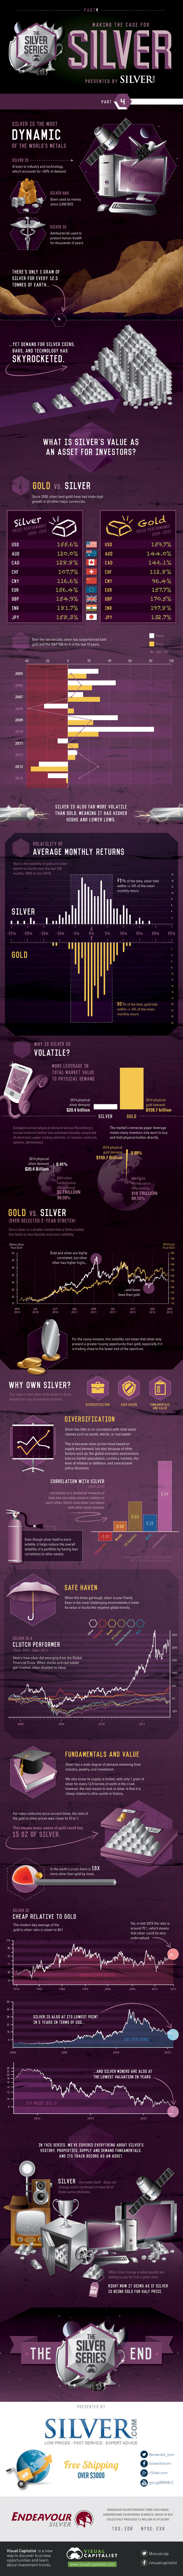 Making the Case for Silver as an Asset